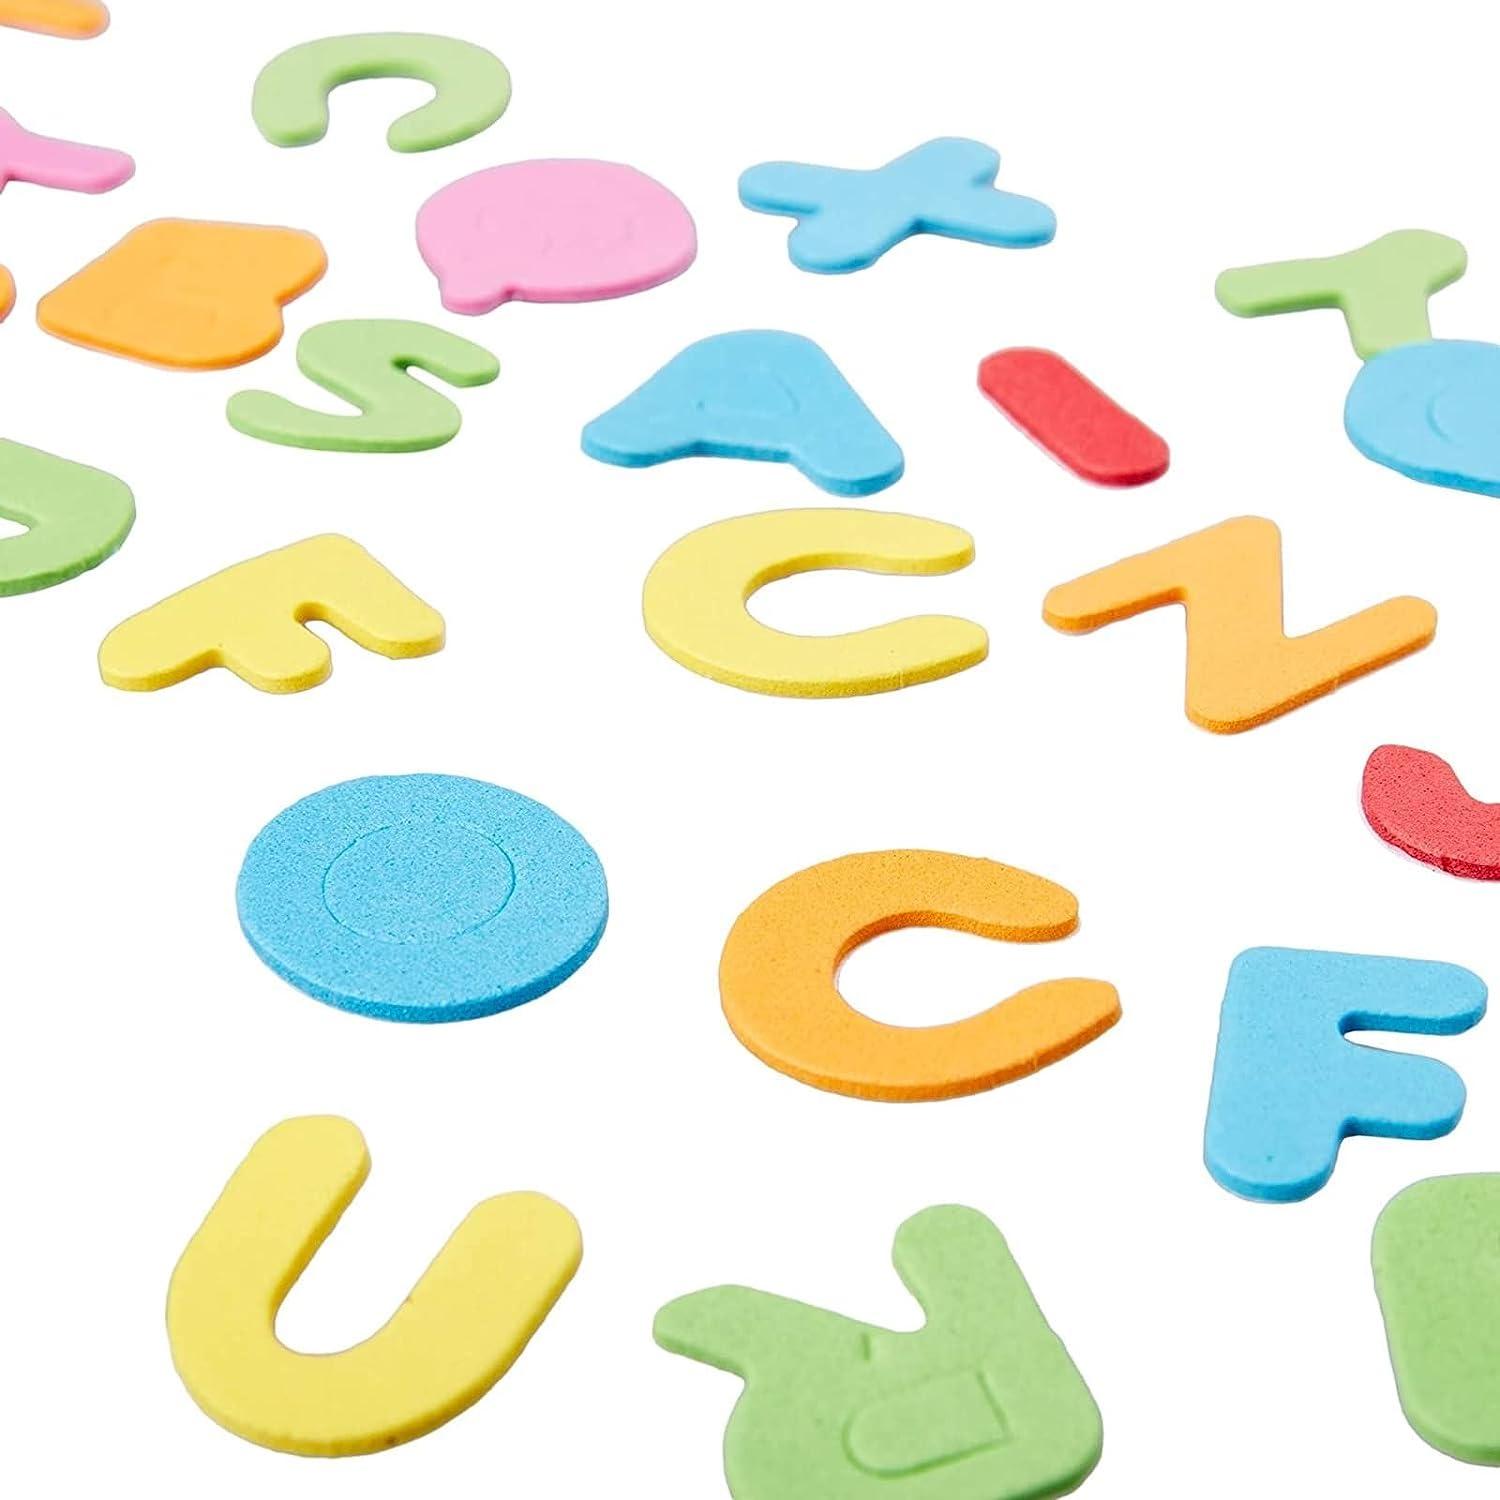 Foam Stickers, Self-Adhesive Alphabet Letters for Kids, 1300 Pieces (0.87 x 1 in)